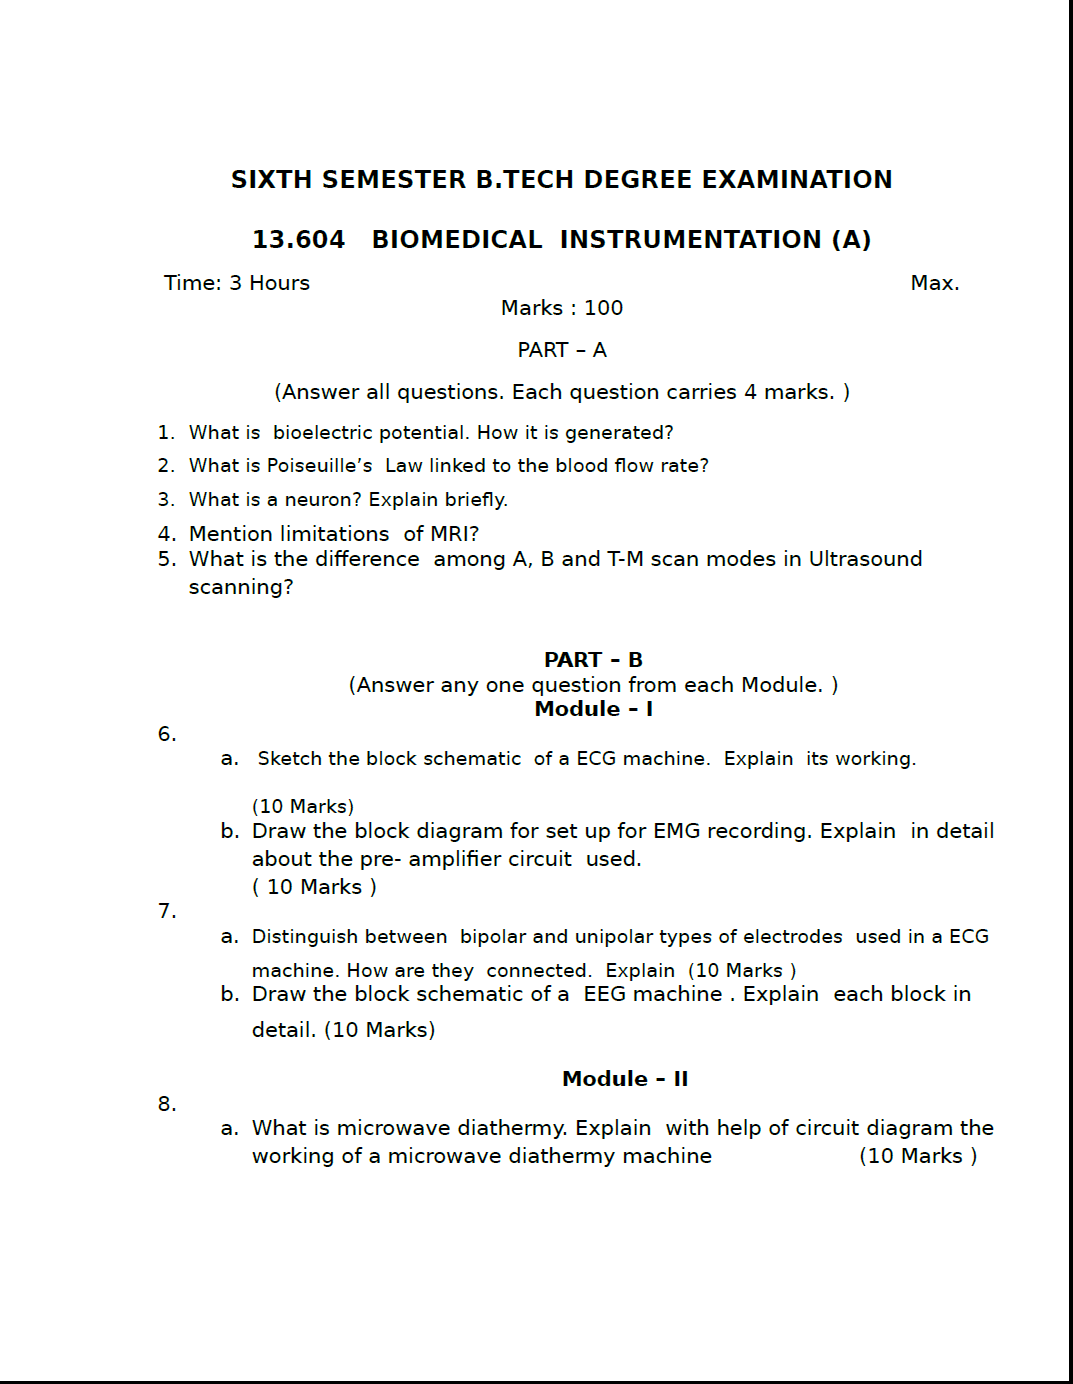 basic course in biomedical research question paper